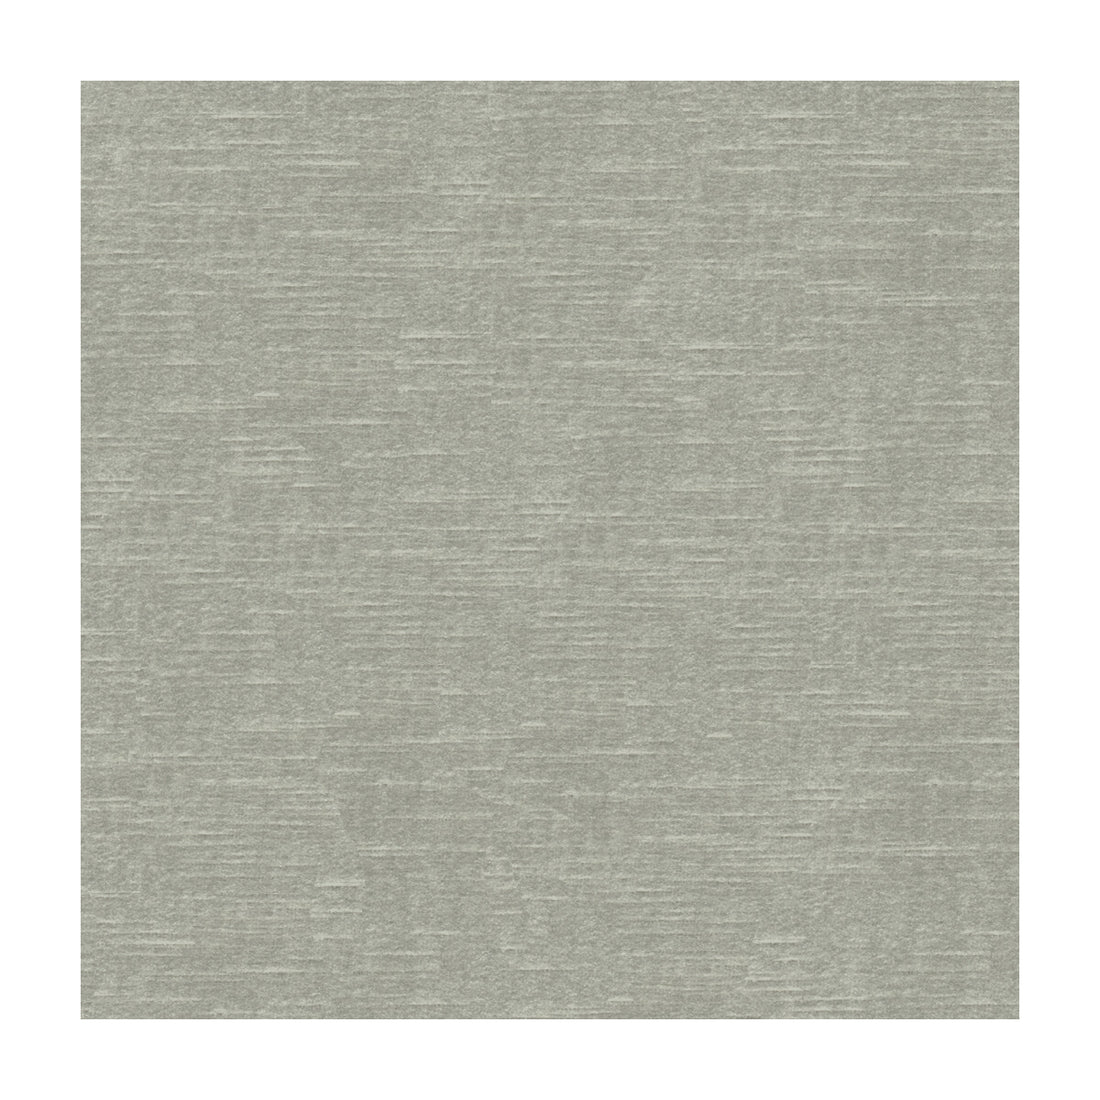 Venetian fabric in grey color - pattern 31326.2111.0 - by Kravet Design in the The Complete Velvet collection